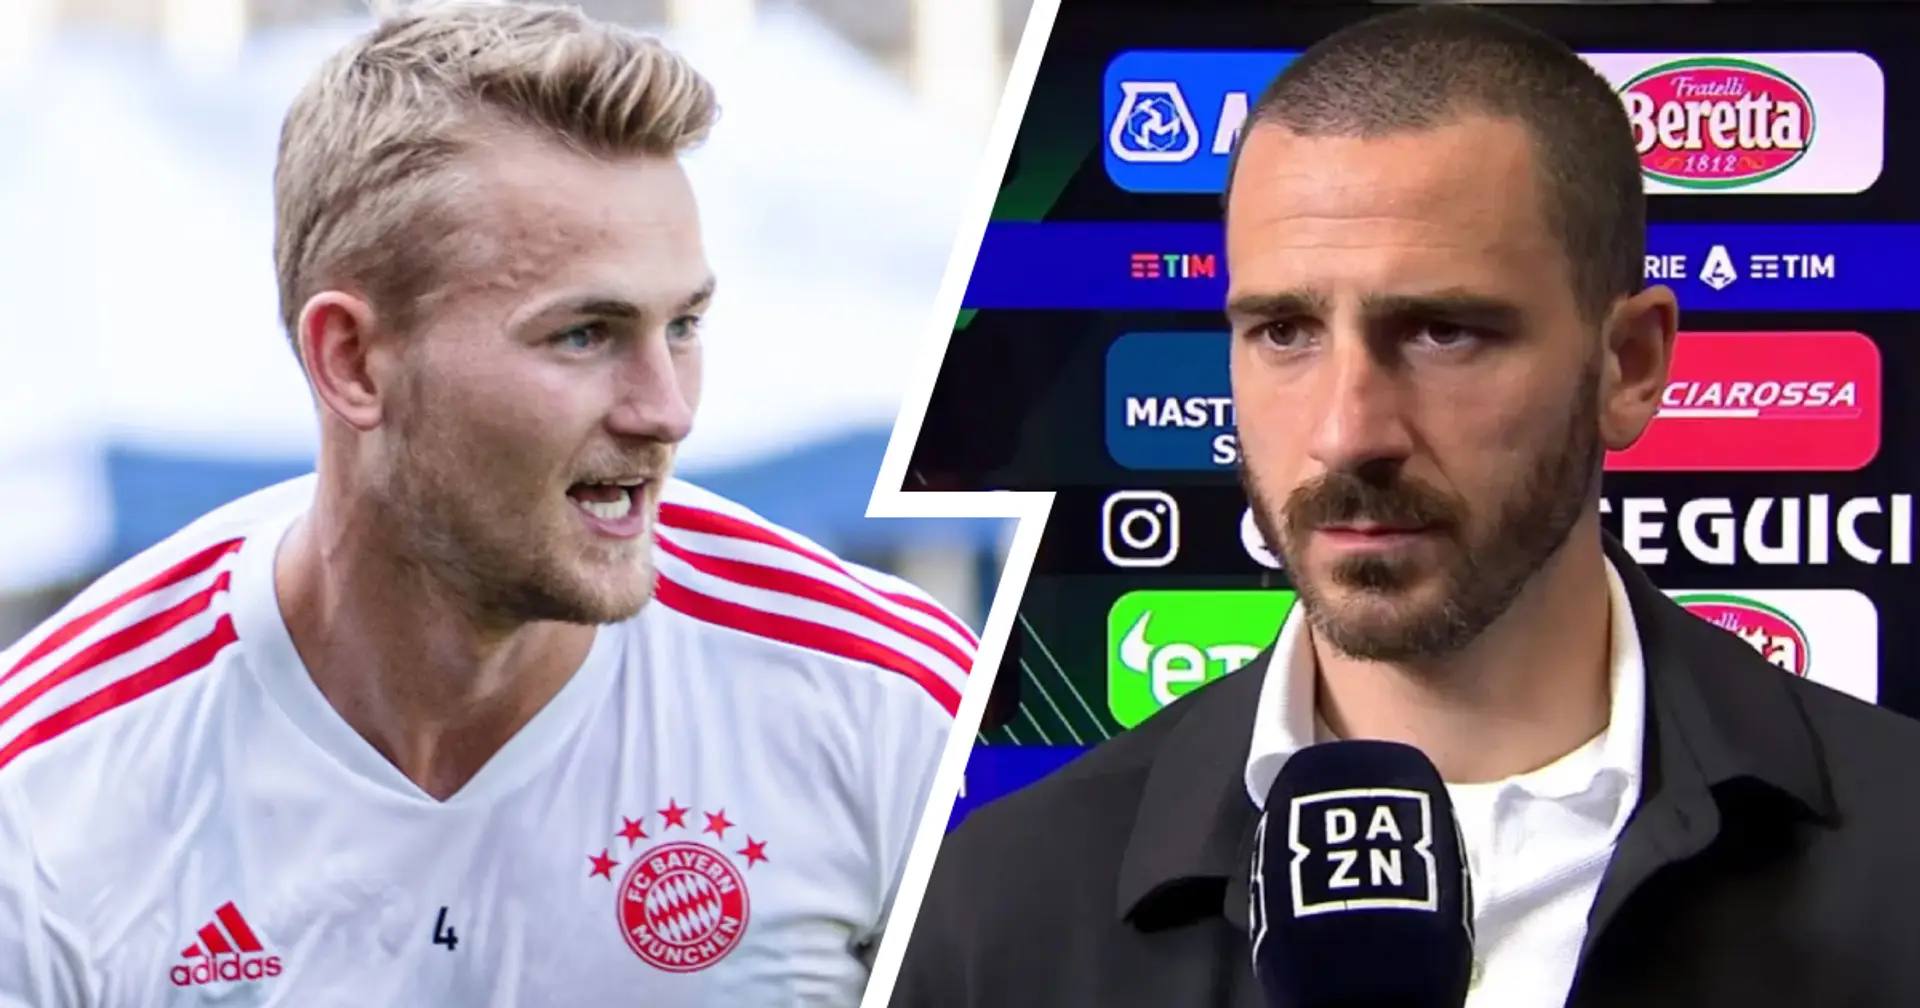 'You need to be respectful': Bonucci sends strong message to De Lift after Bayern move